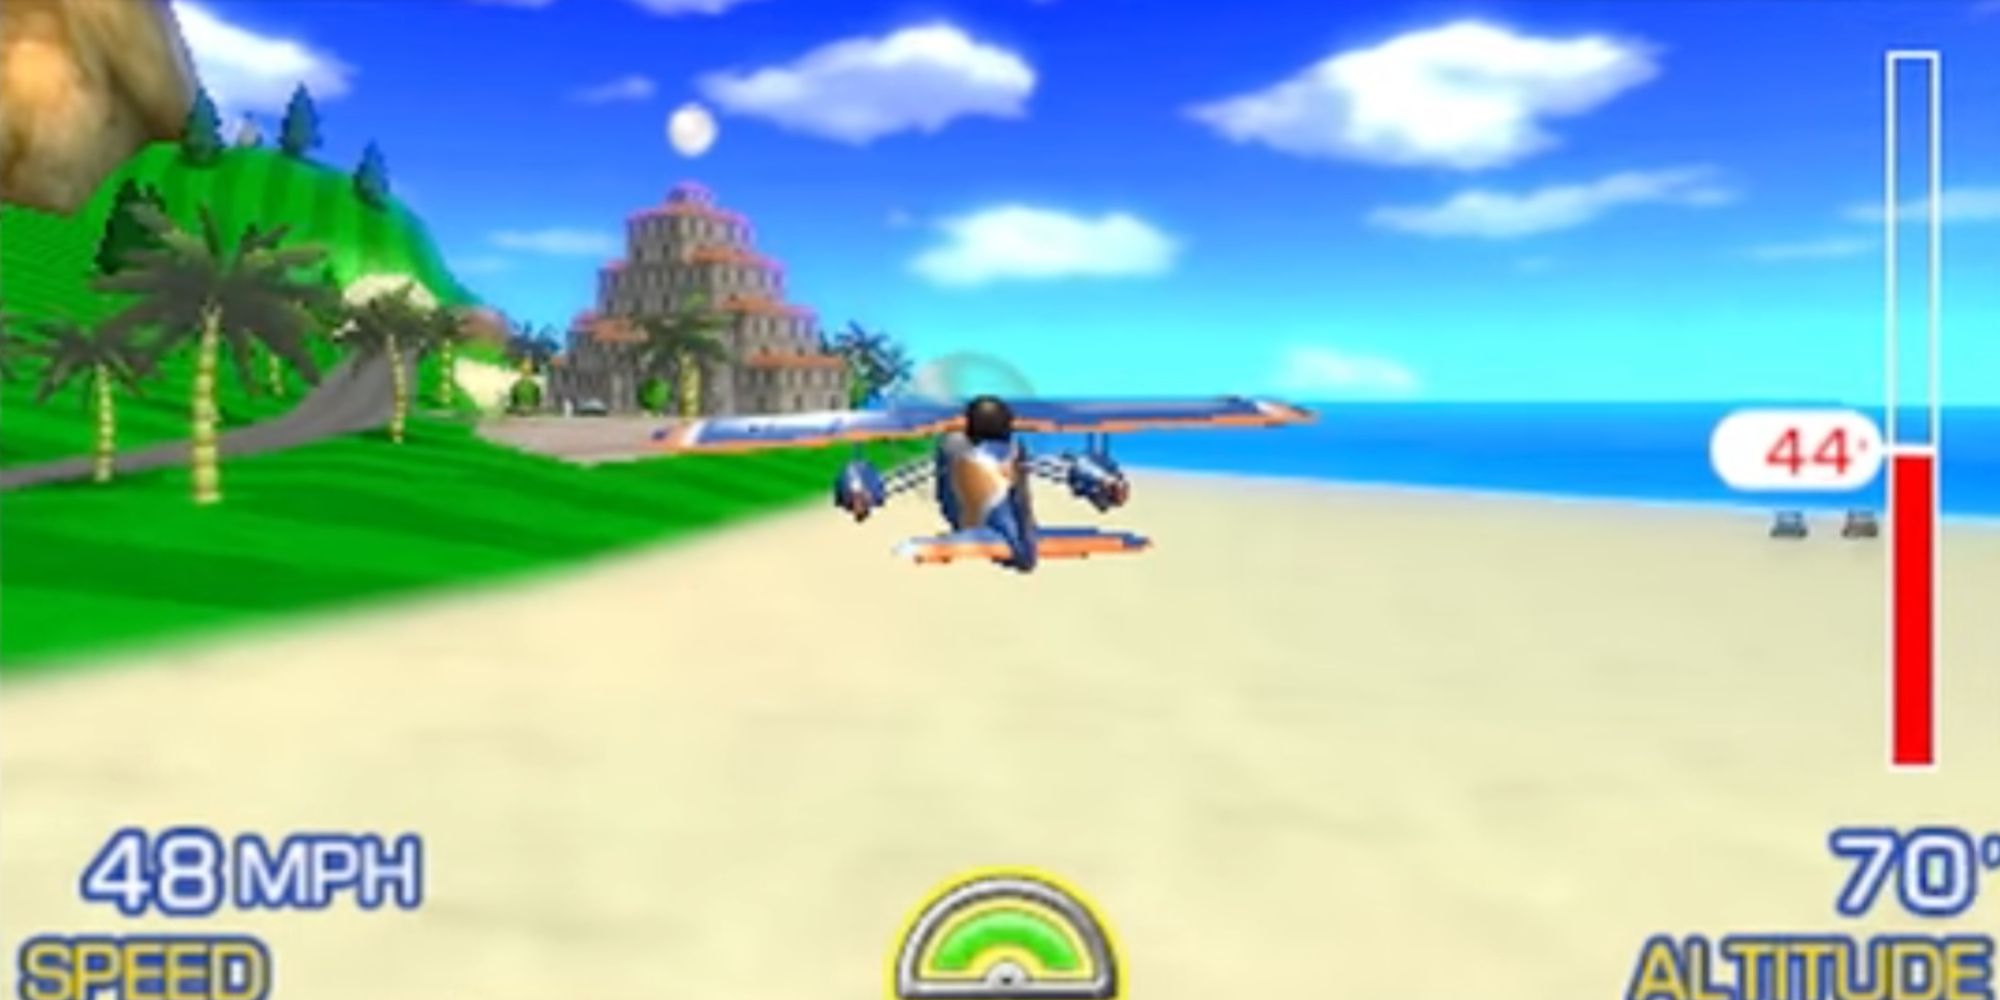 Wii Sports Resort' is a great gaming getaway